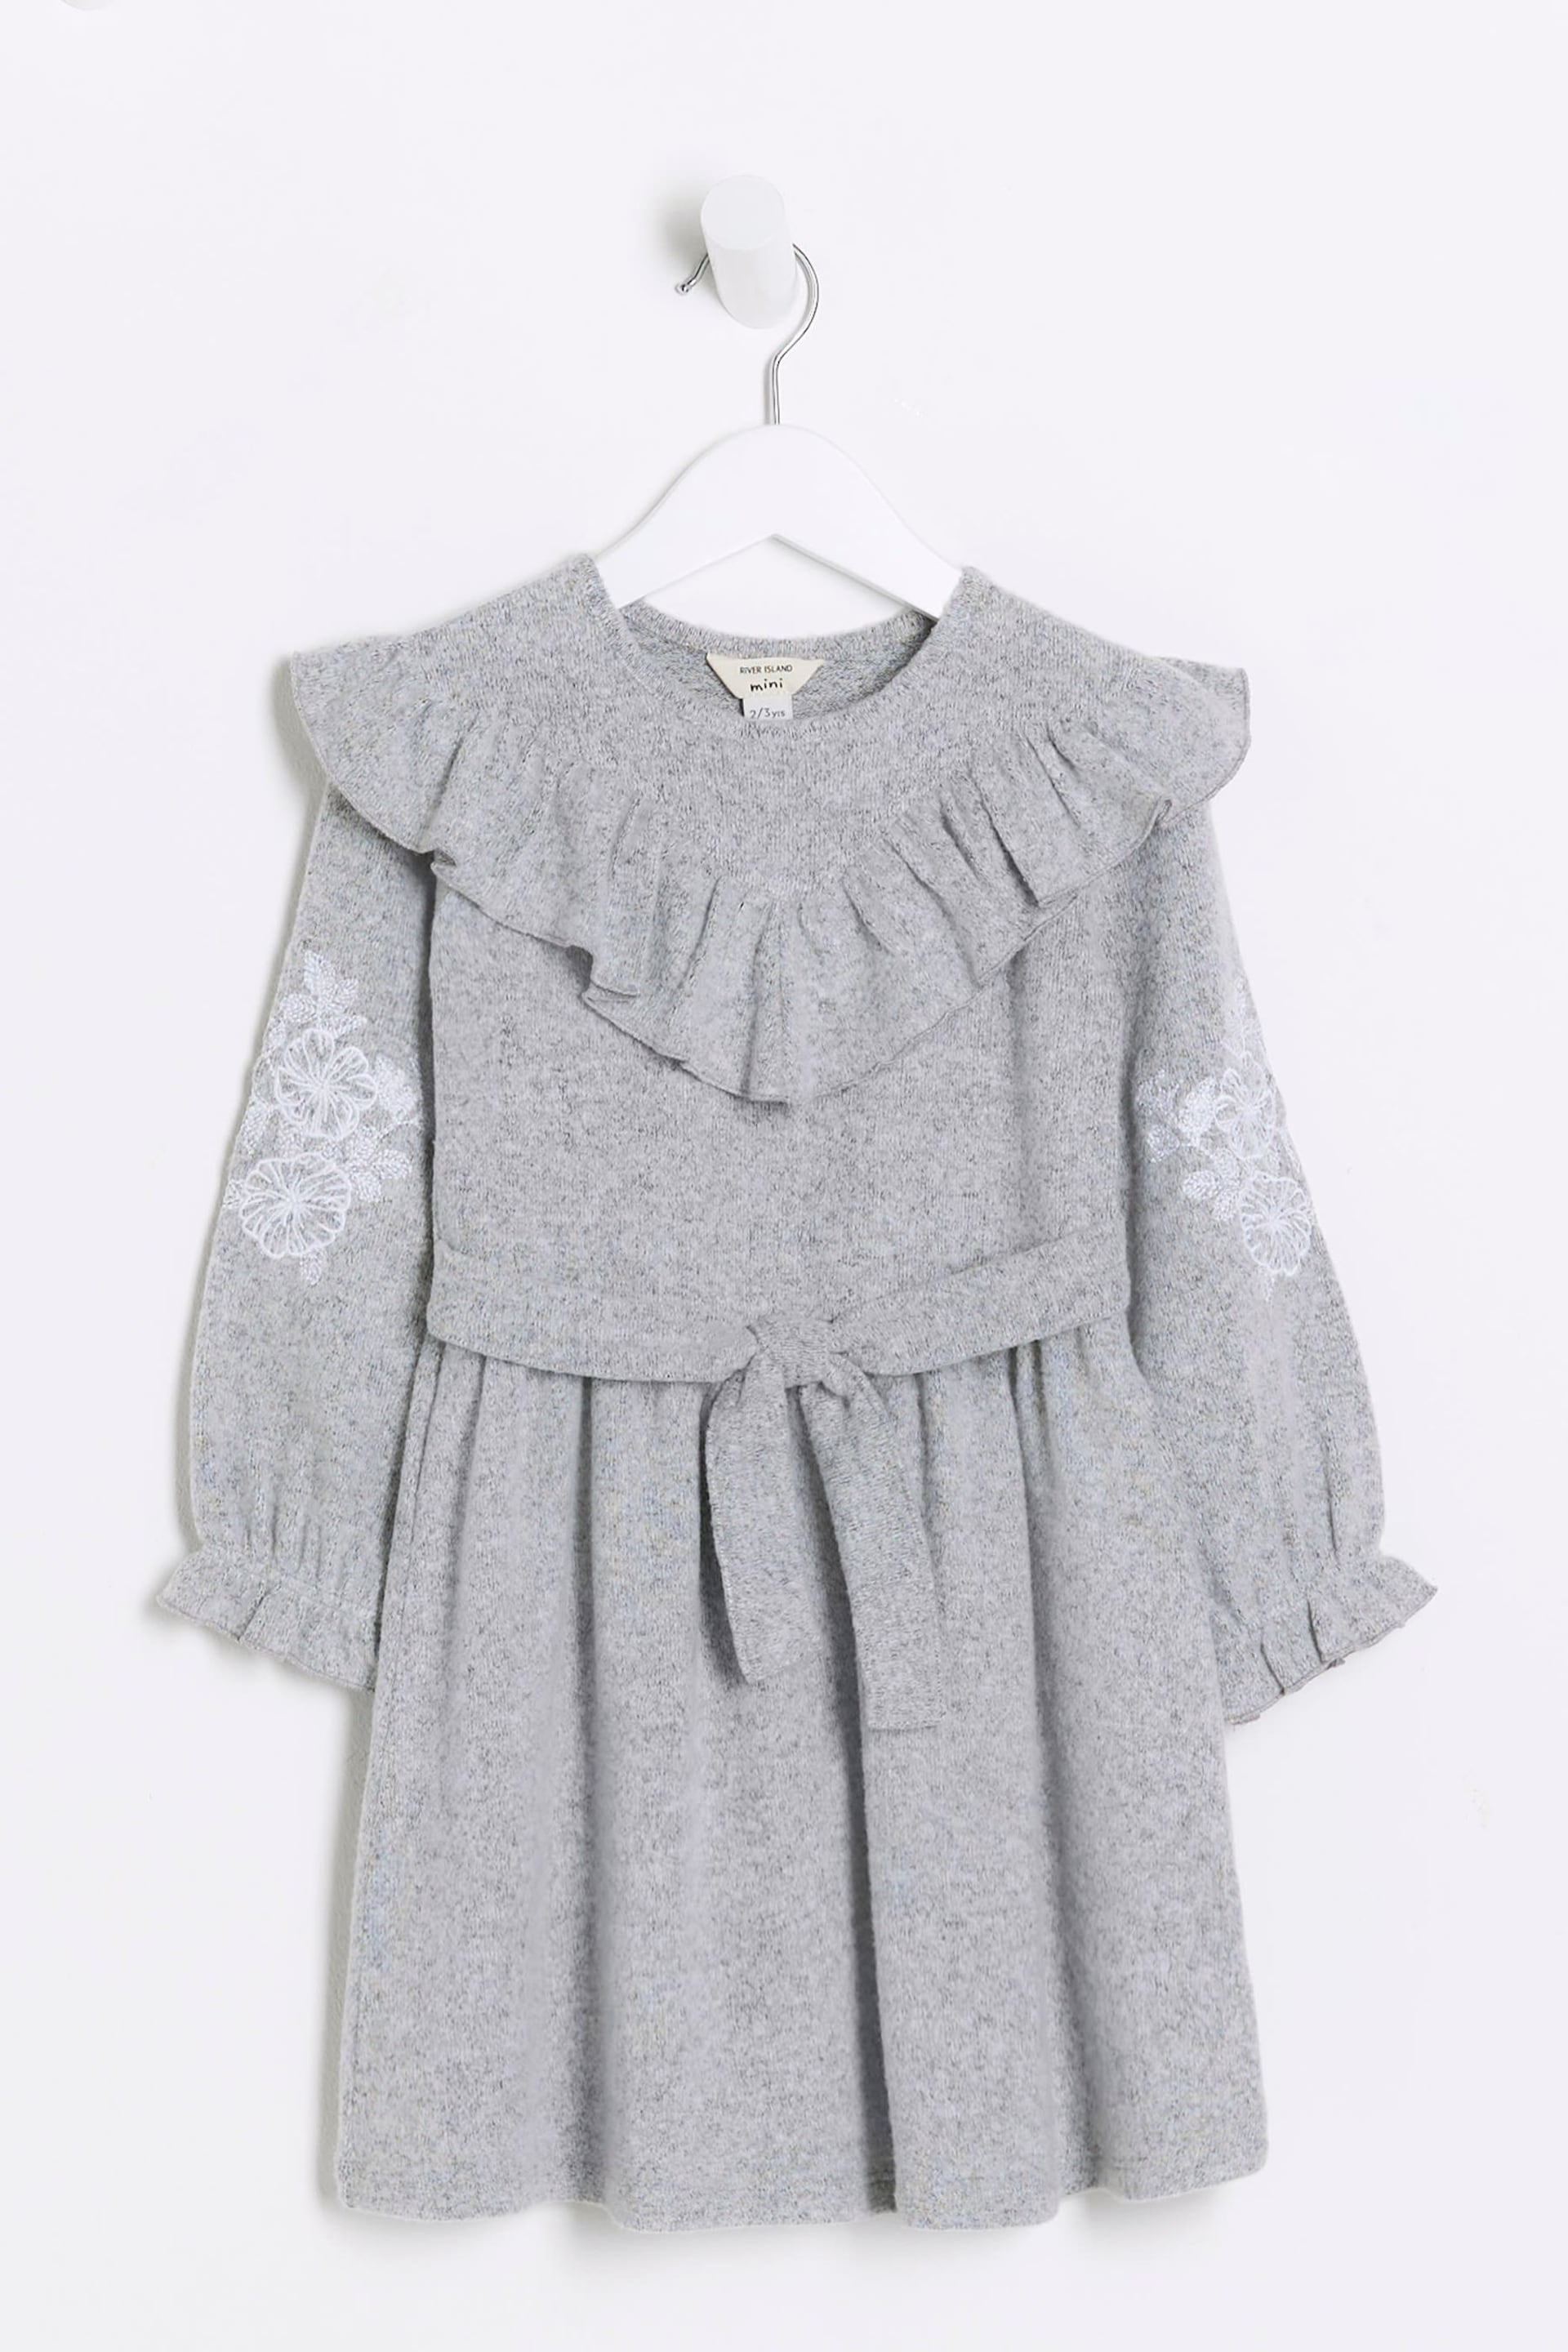 River Island Grey Mini Girls Cosy Embroidery Dress - Image 1 of 4